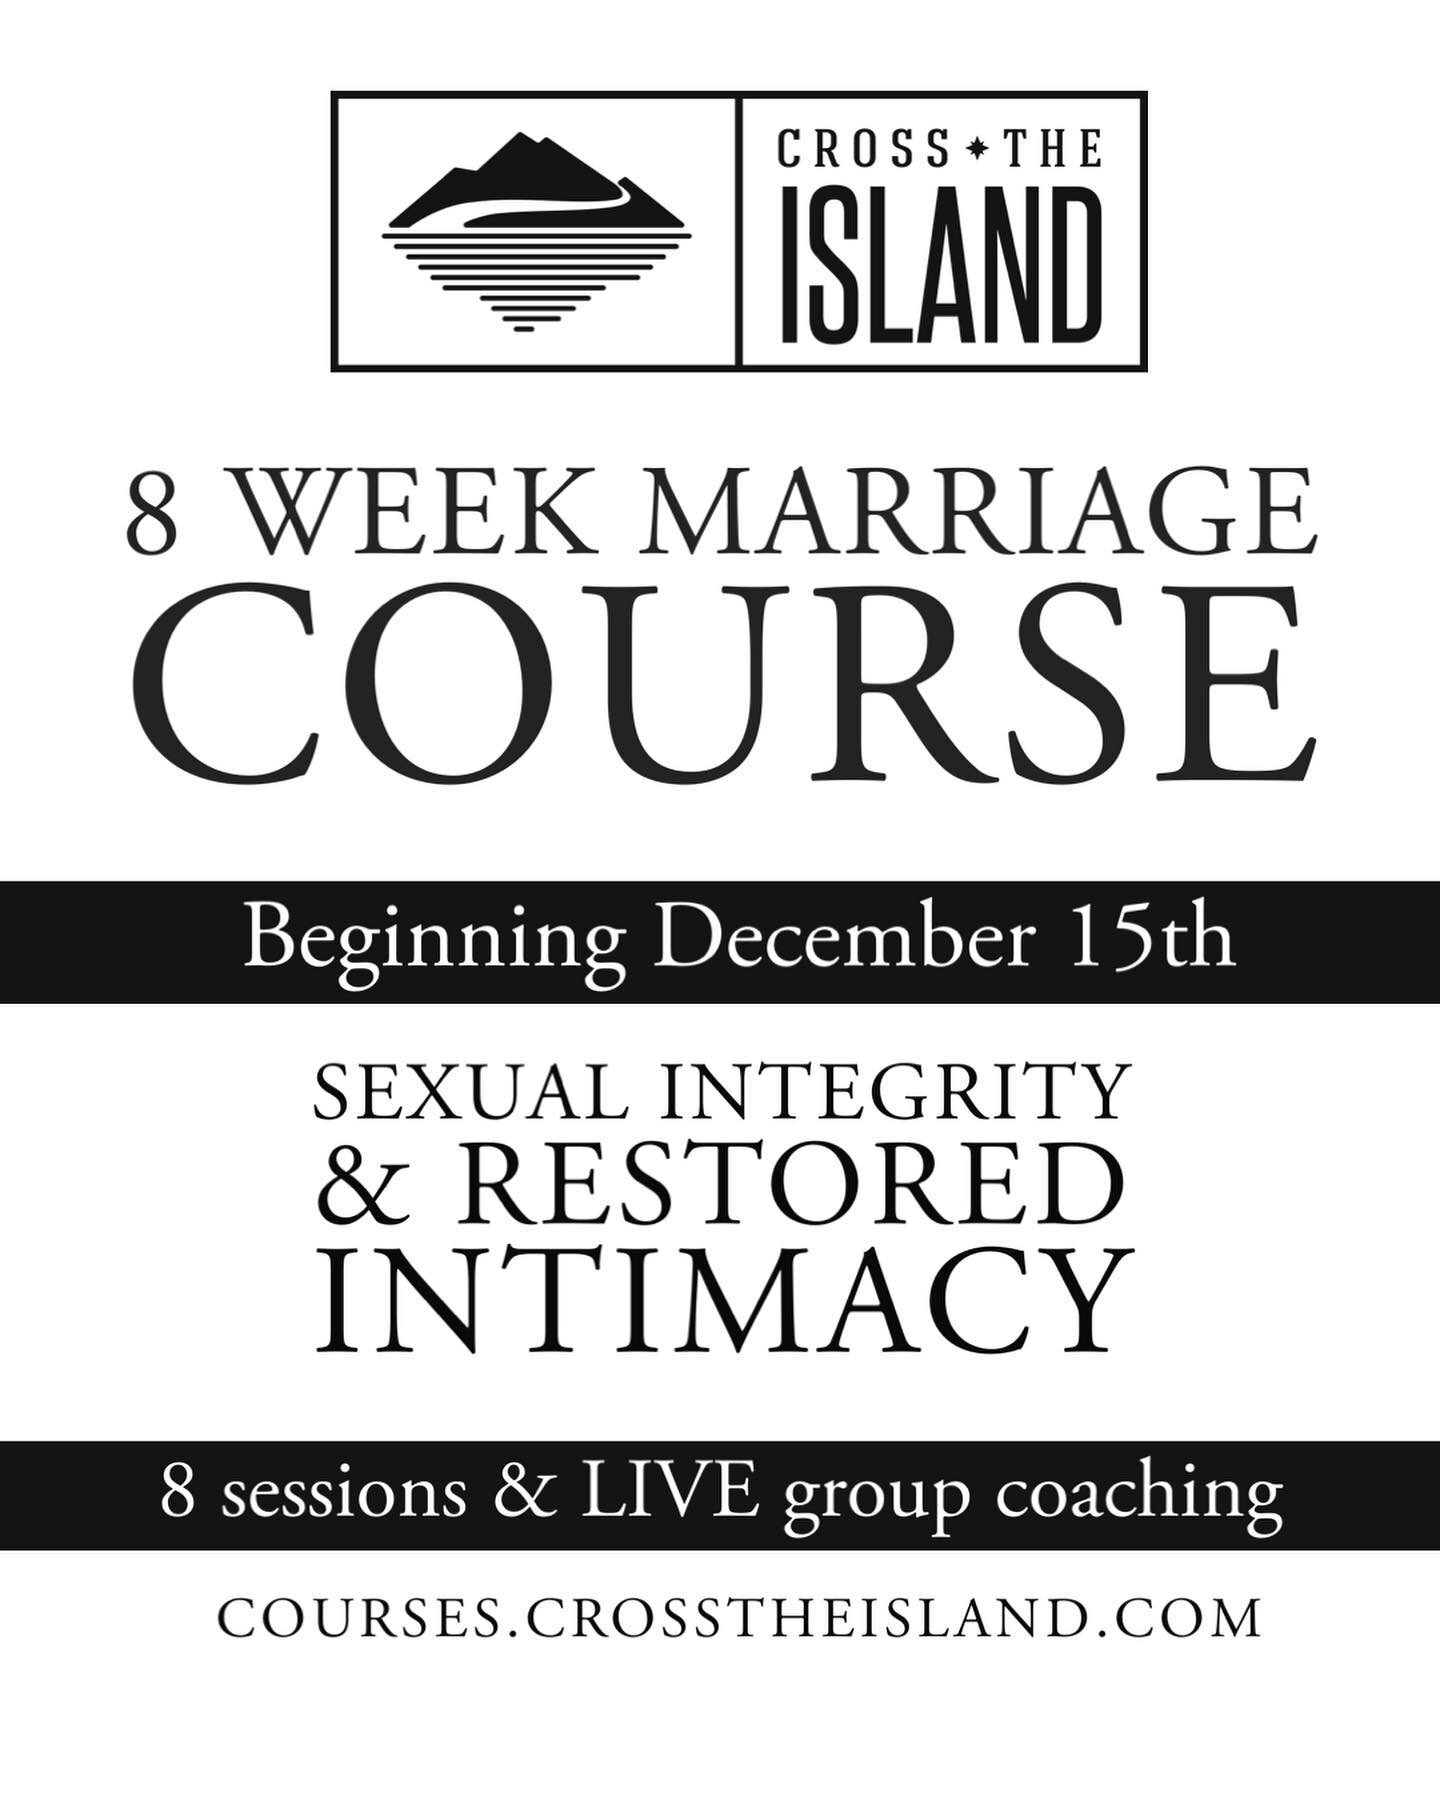 Has unwanted sexual behavior impacted your marriage and intimacy?
&nbsp;
Do you feel disconnected from your spouse?
&nbsp;&nbsp;
Would you like to safeguard your marriage from sexual sin?
&nbsp;
Are you tired of making excuses?
&nbsp;
Are you tired o